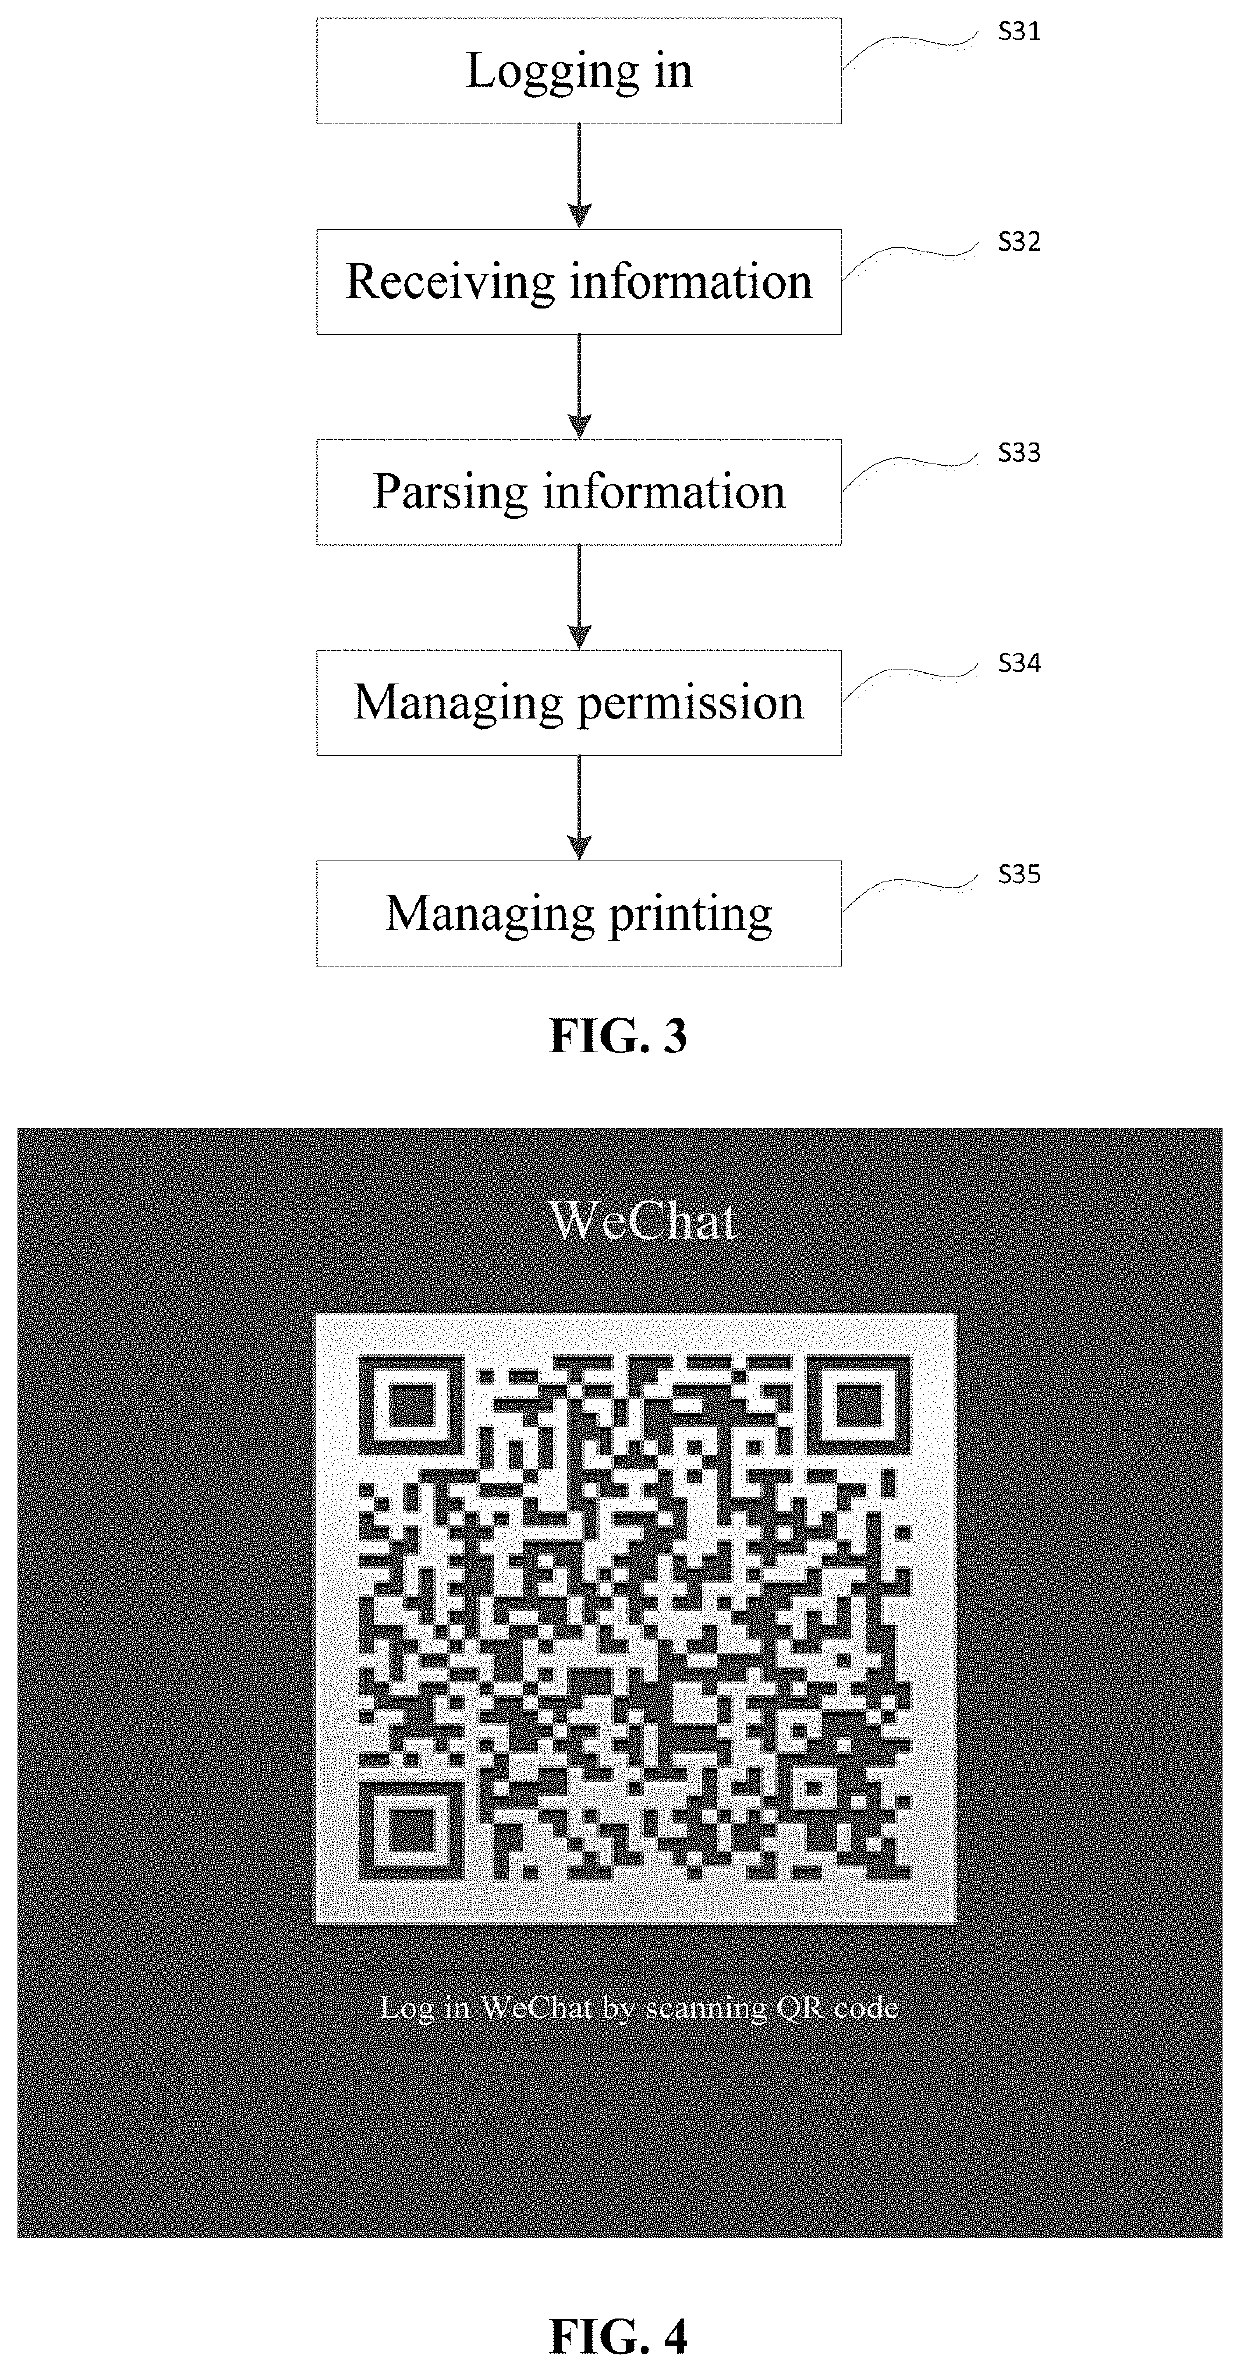 Image forming system and method thereof for parsing instant messaging information